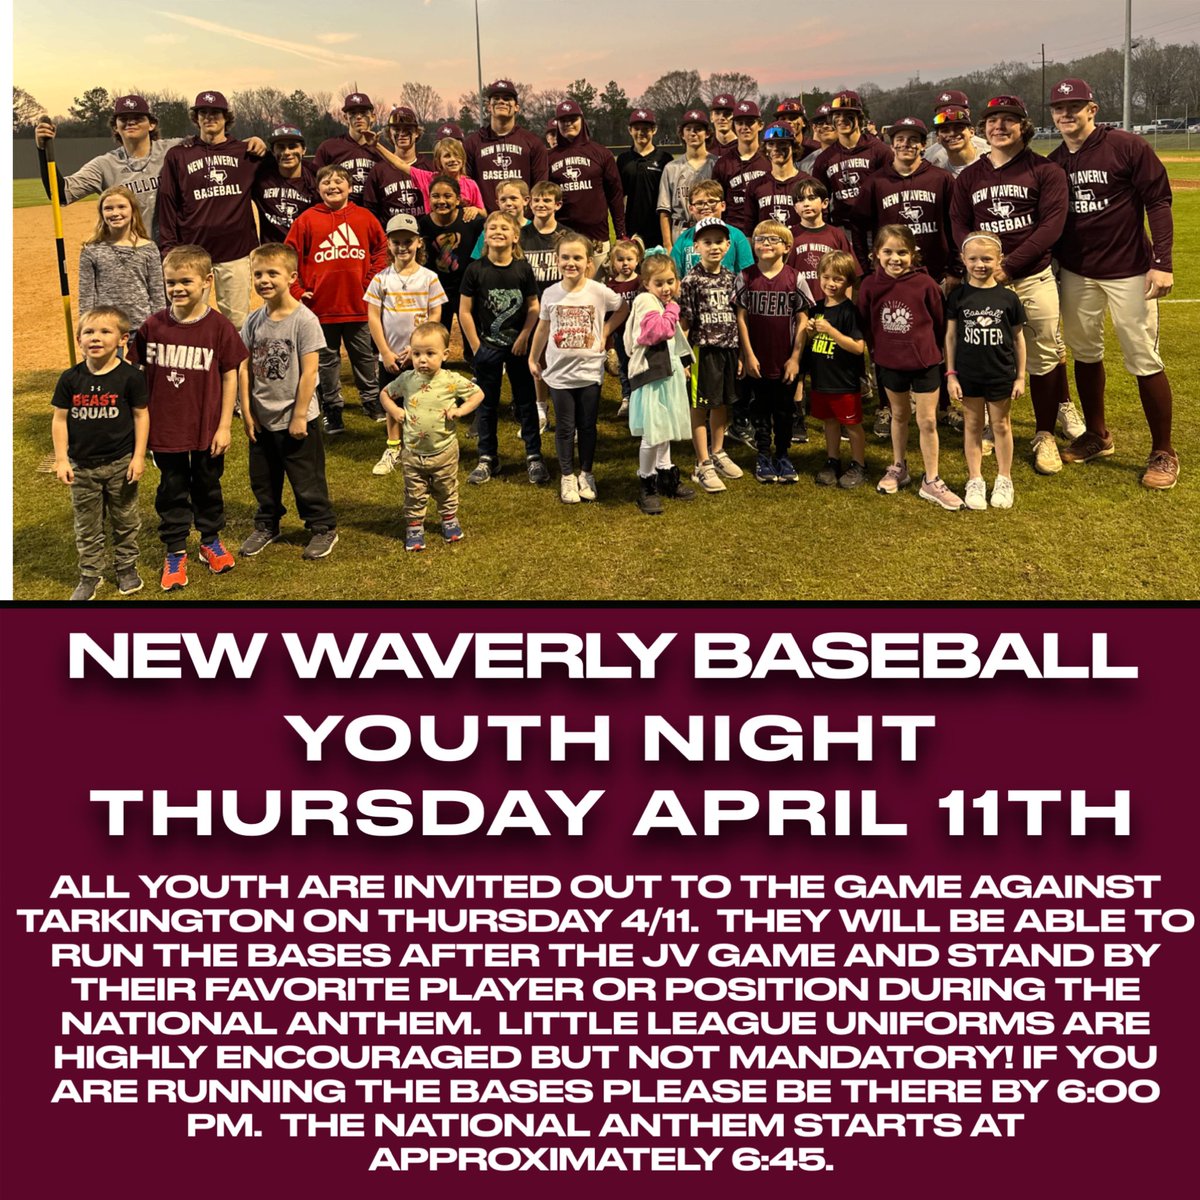 With the rescheduling of the games due to weather, I was not sure if we would be able to have our youth night but I still would like to have it for anybody who can participate!